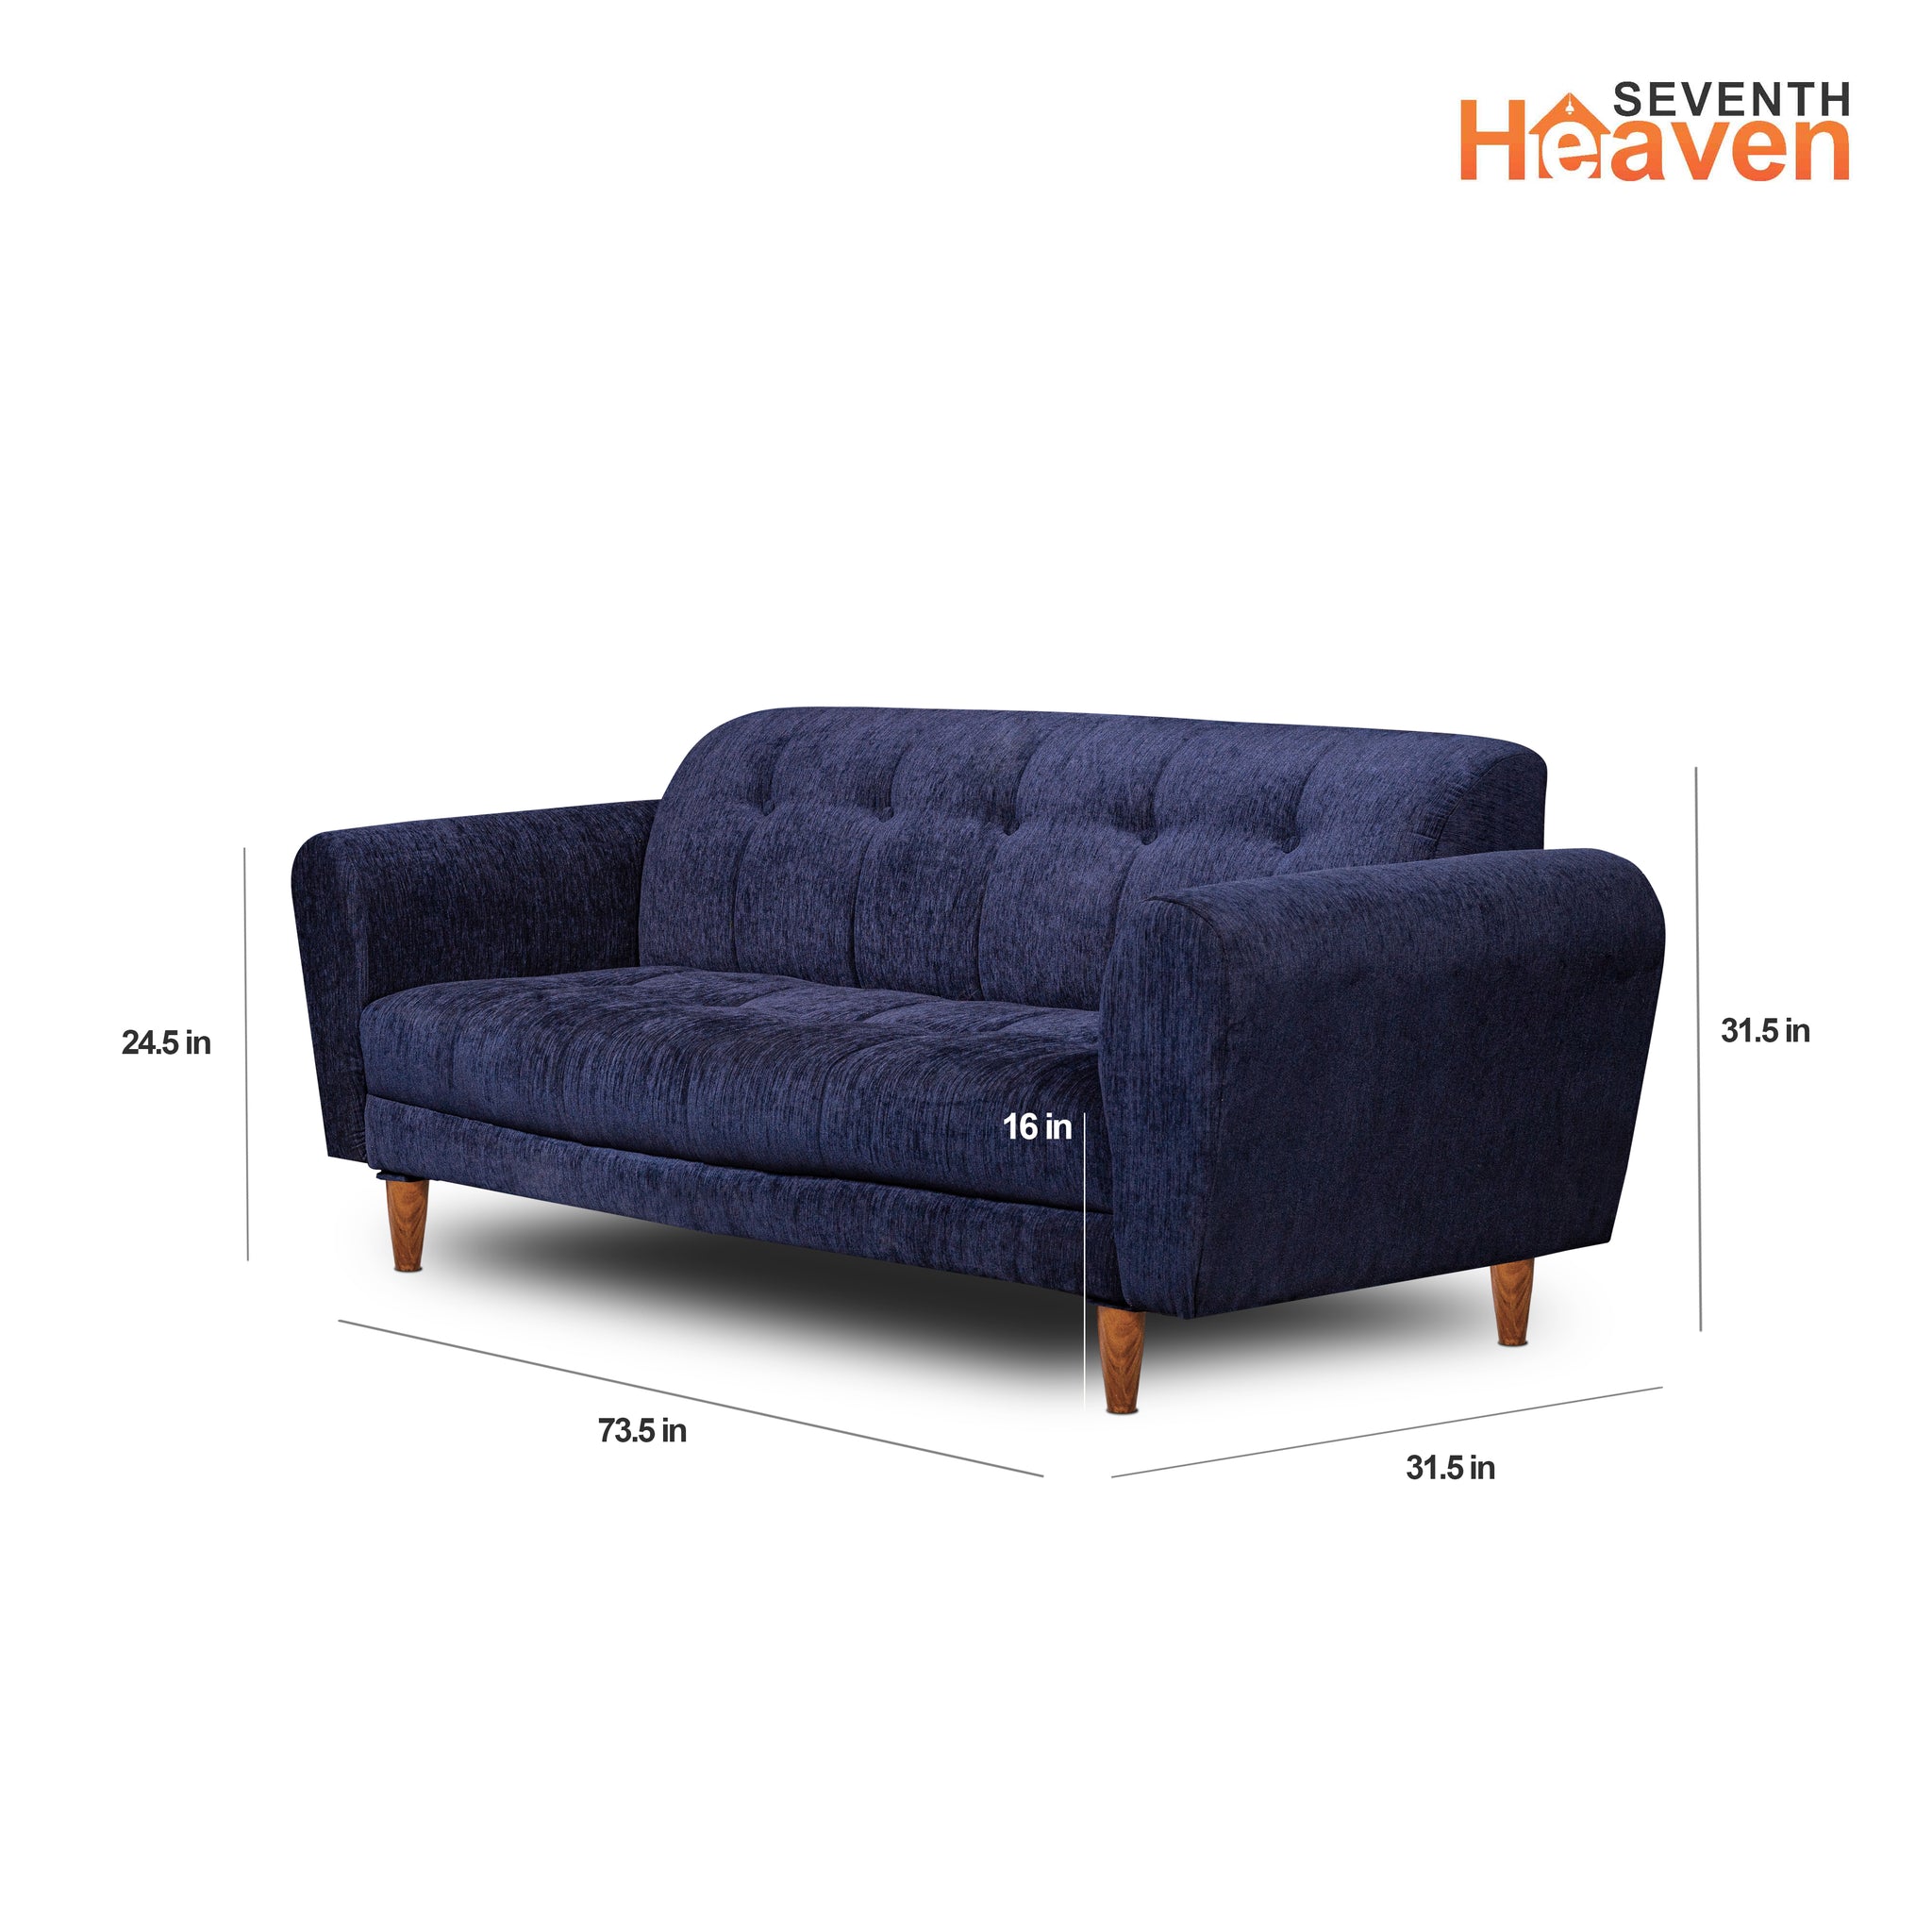 Seventh Heaven Milan 3 Seater Wooden Sofa Set Modern & Elegant Smart Furniture Range for luxurious homes, living rooms and offices. Blue Colour Molphino fabric with sheesham polished wooden legs. Product dimensions are also mentioned.